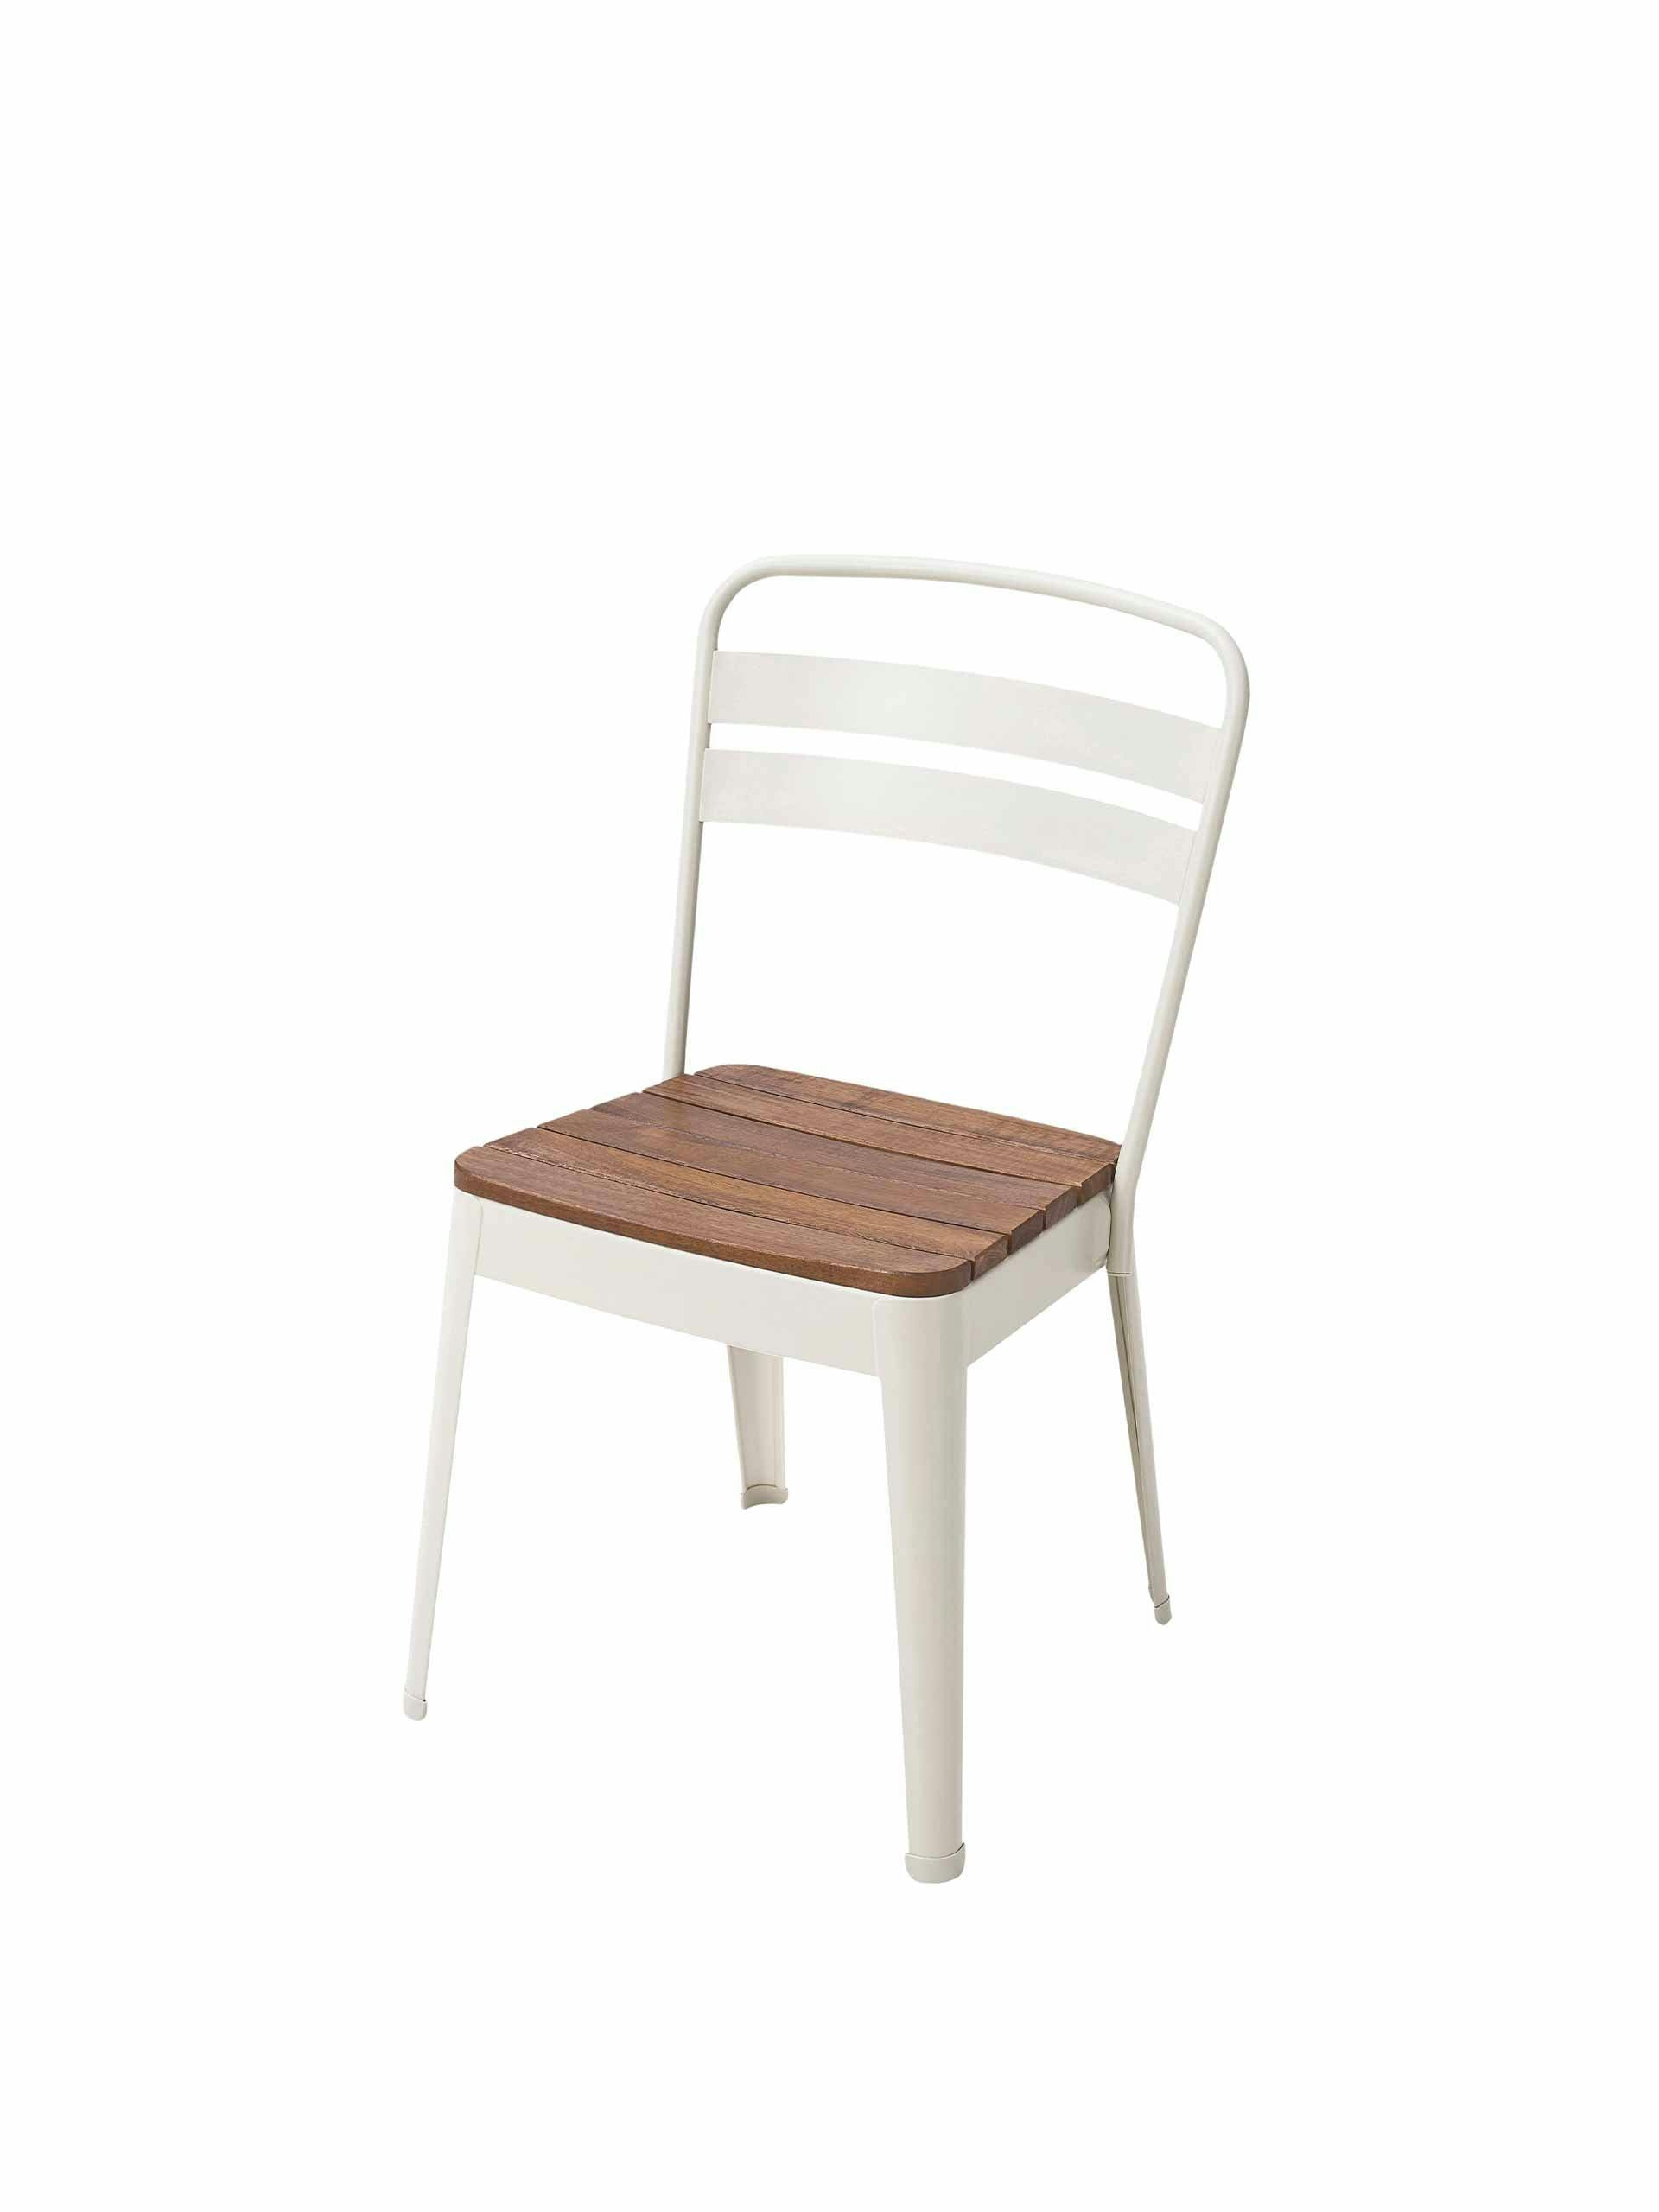 Metal framed outdoor chair with wooden seat